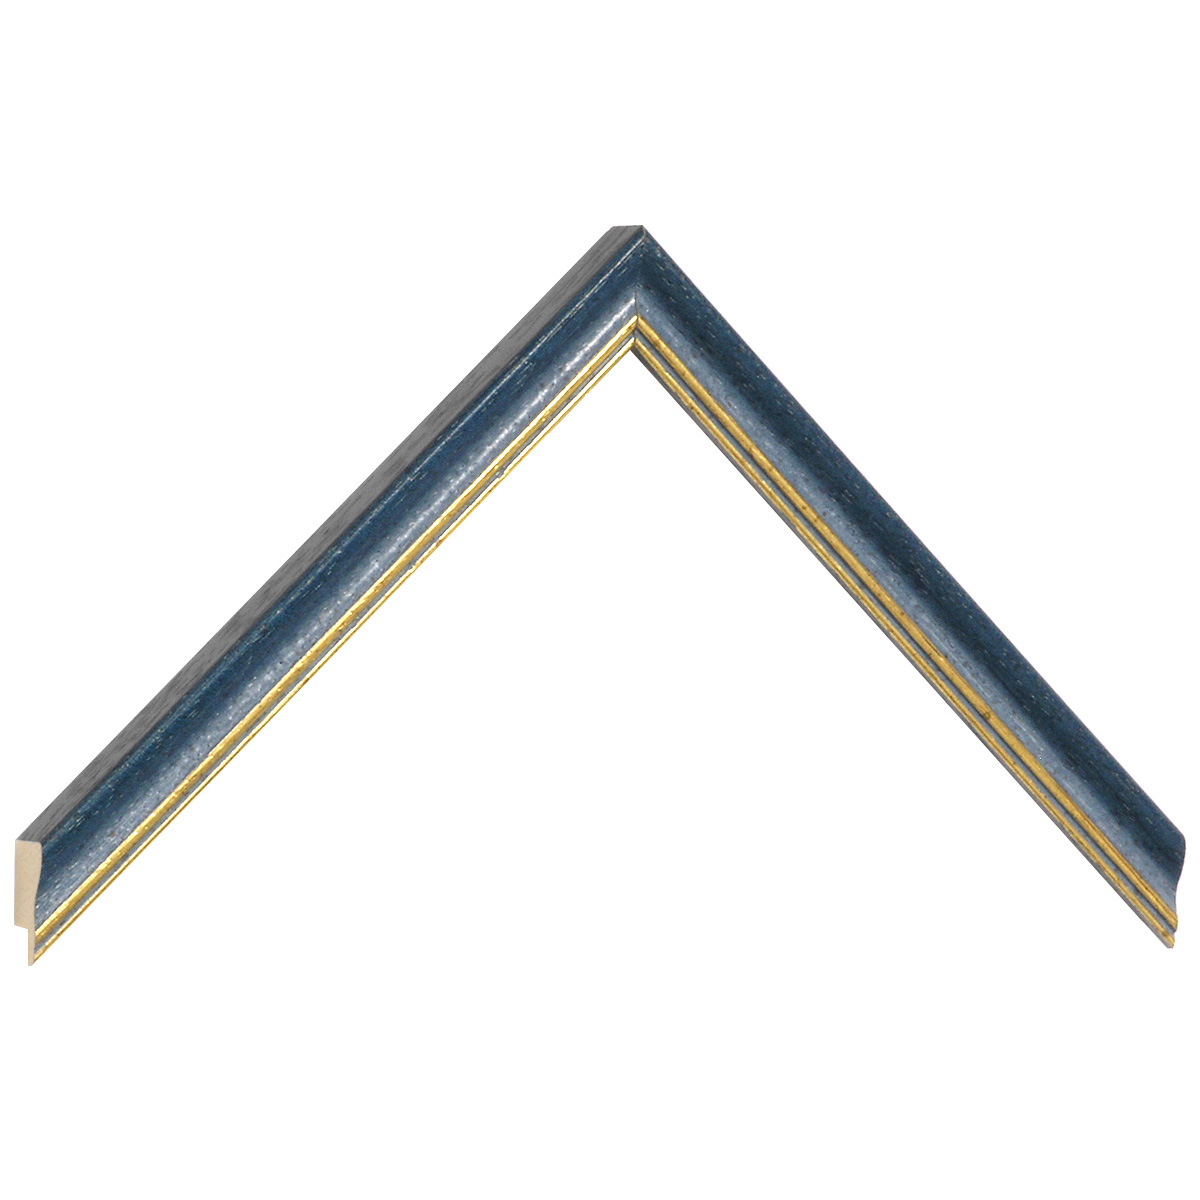 Moulding ayous width 15mm - matt blue with gold edge - Sample